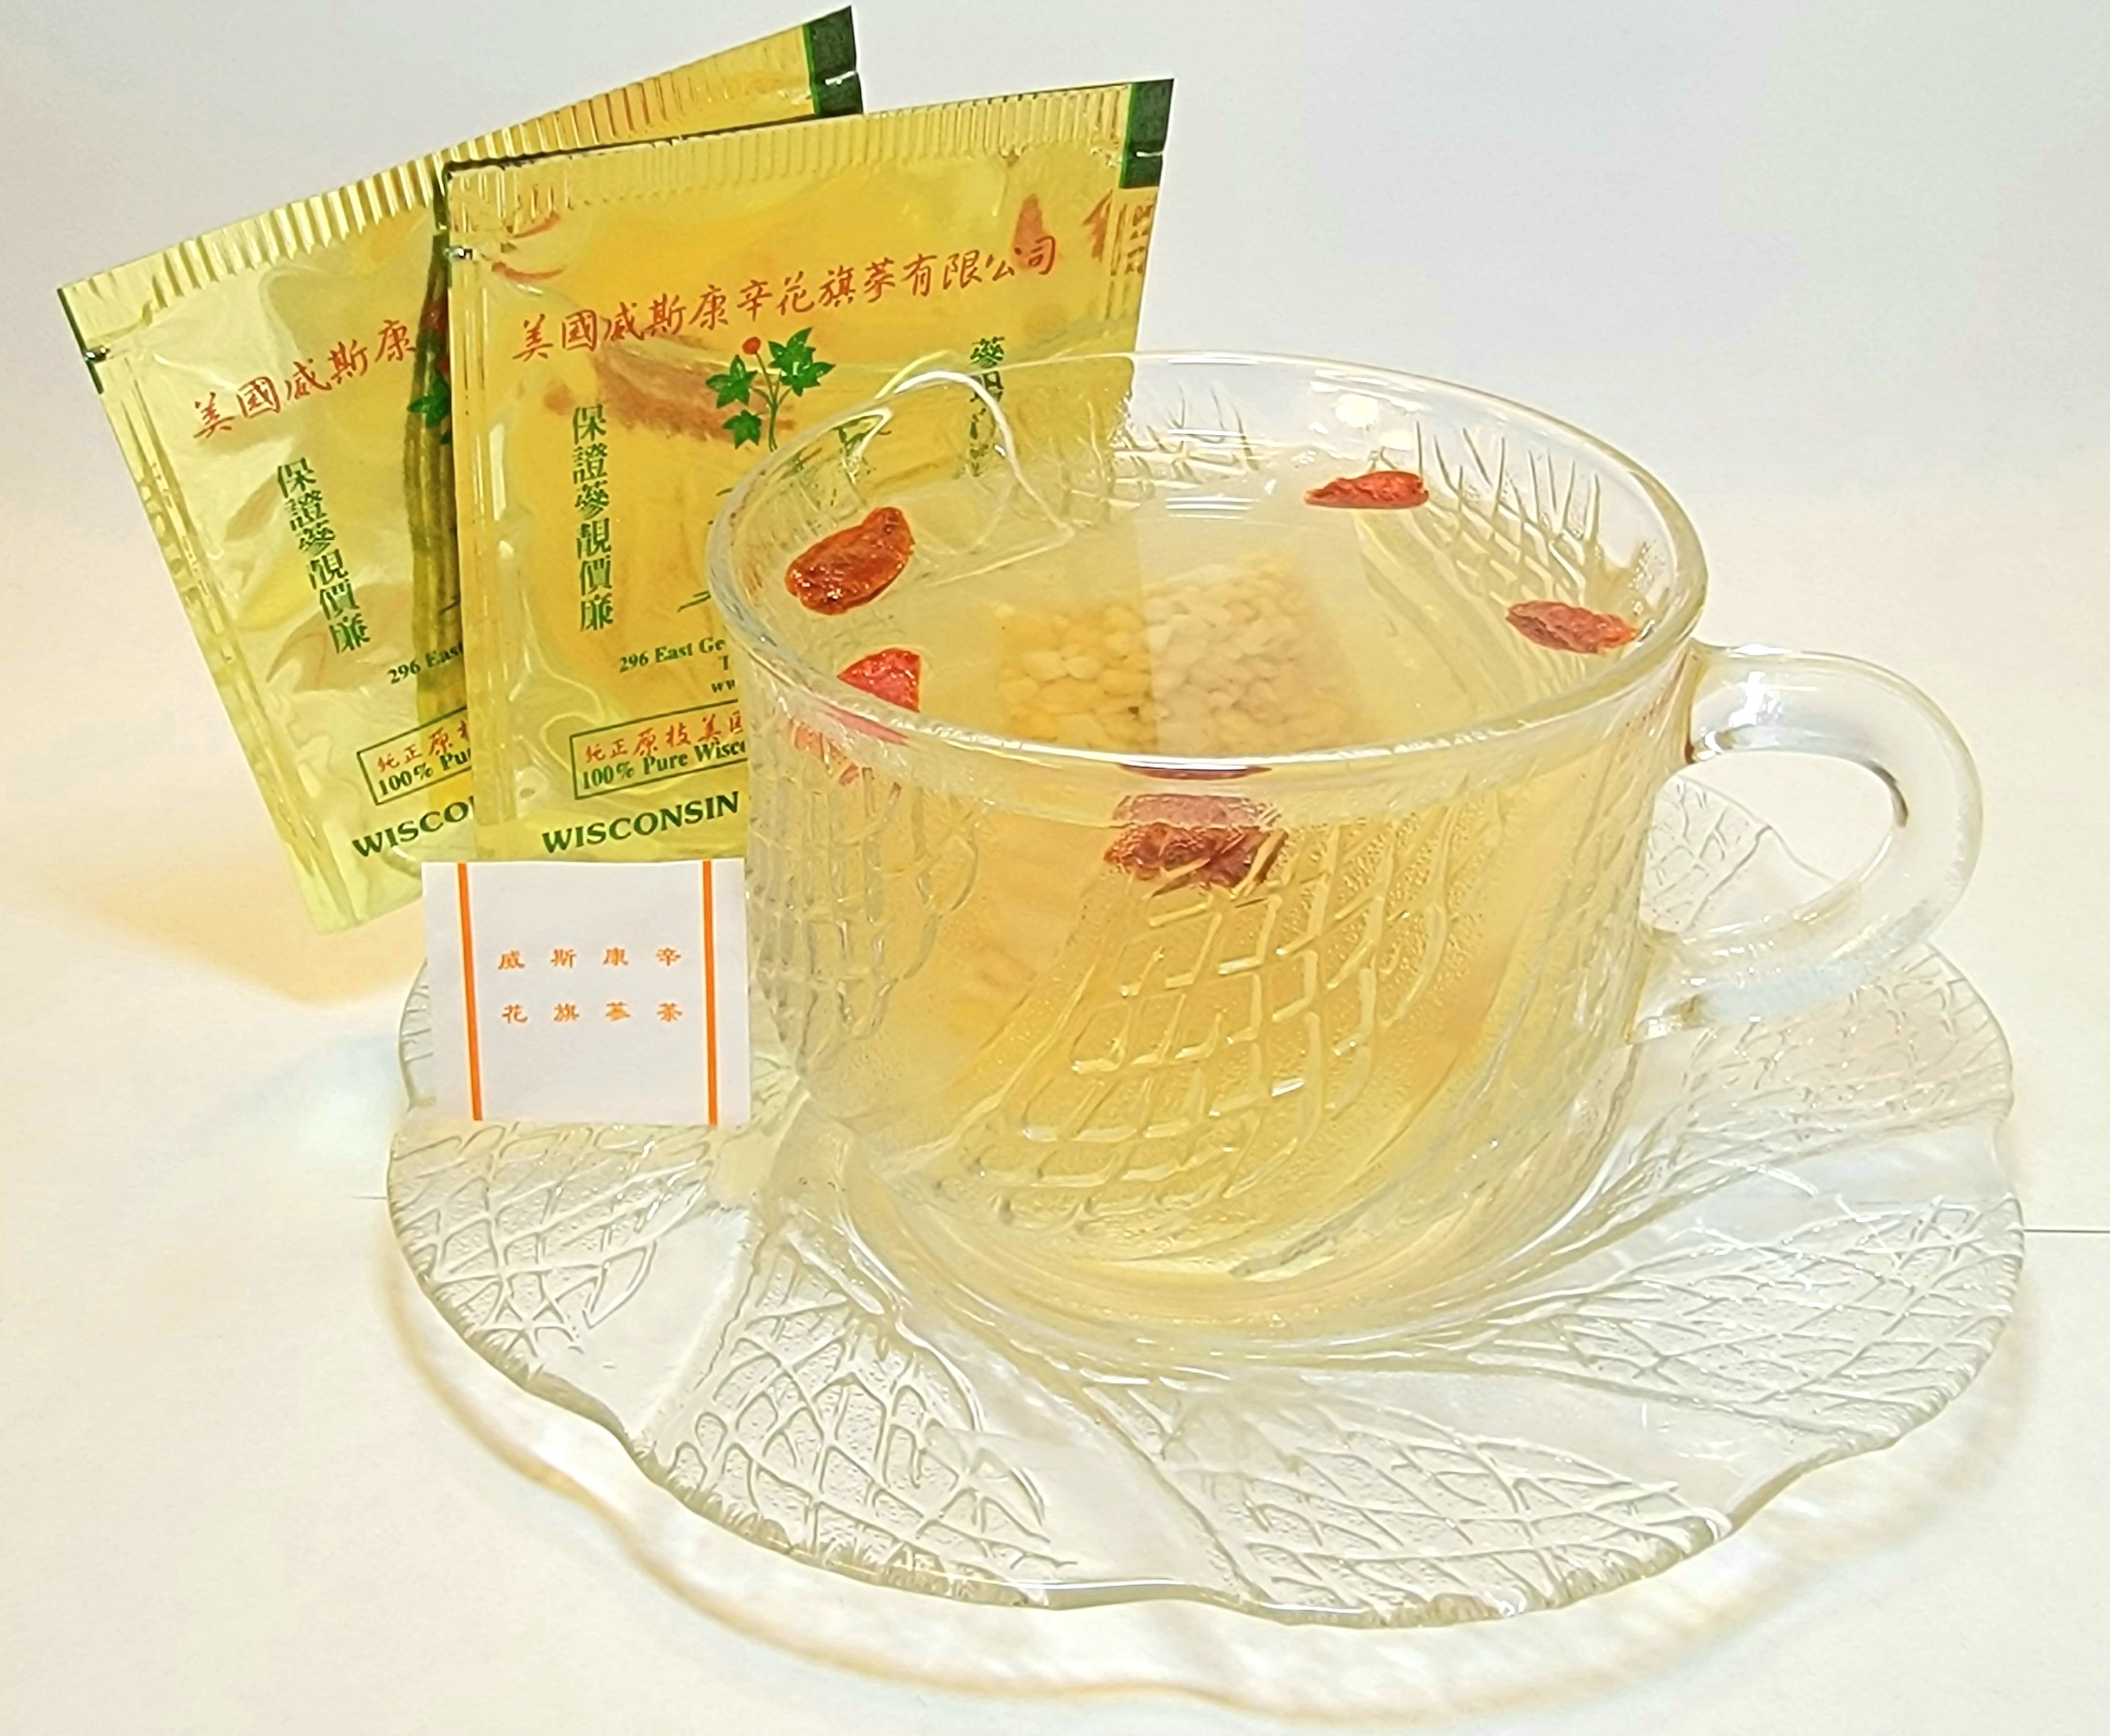 Chrysanthemum Tea with Wisconsin Ginseng and Ophiopogon